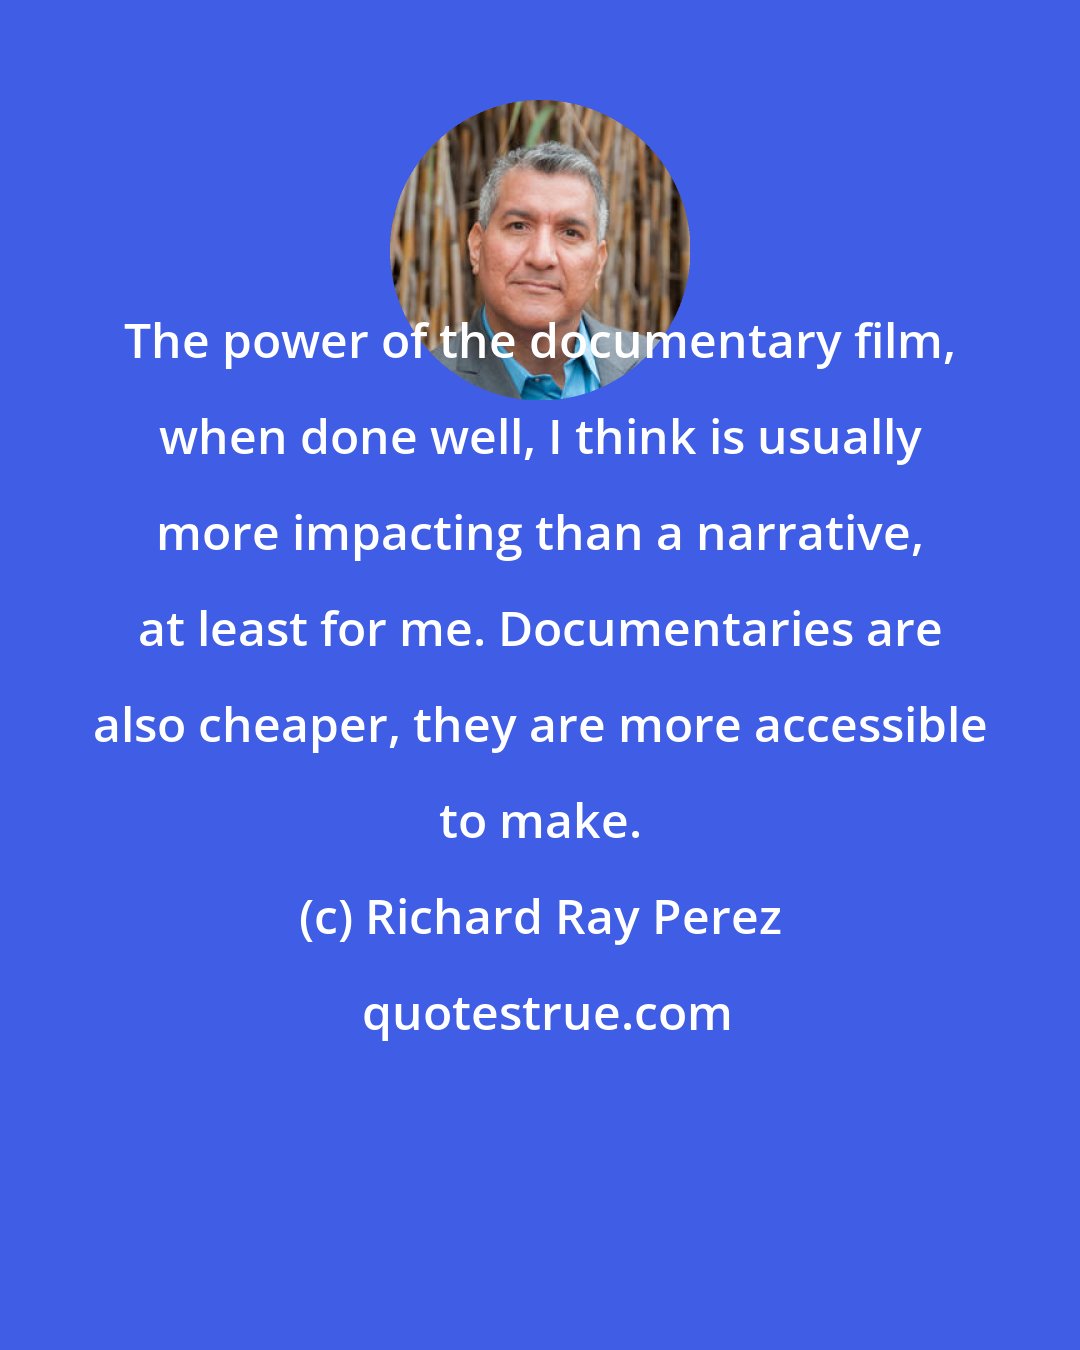 Richard Ray Perez: The power of the documentary film, when done well, I think is usually more impacting than a narrative, at least for me. Documentaries are also cheaper, they are more accessible to make.